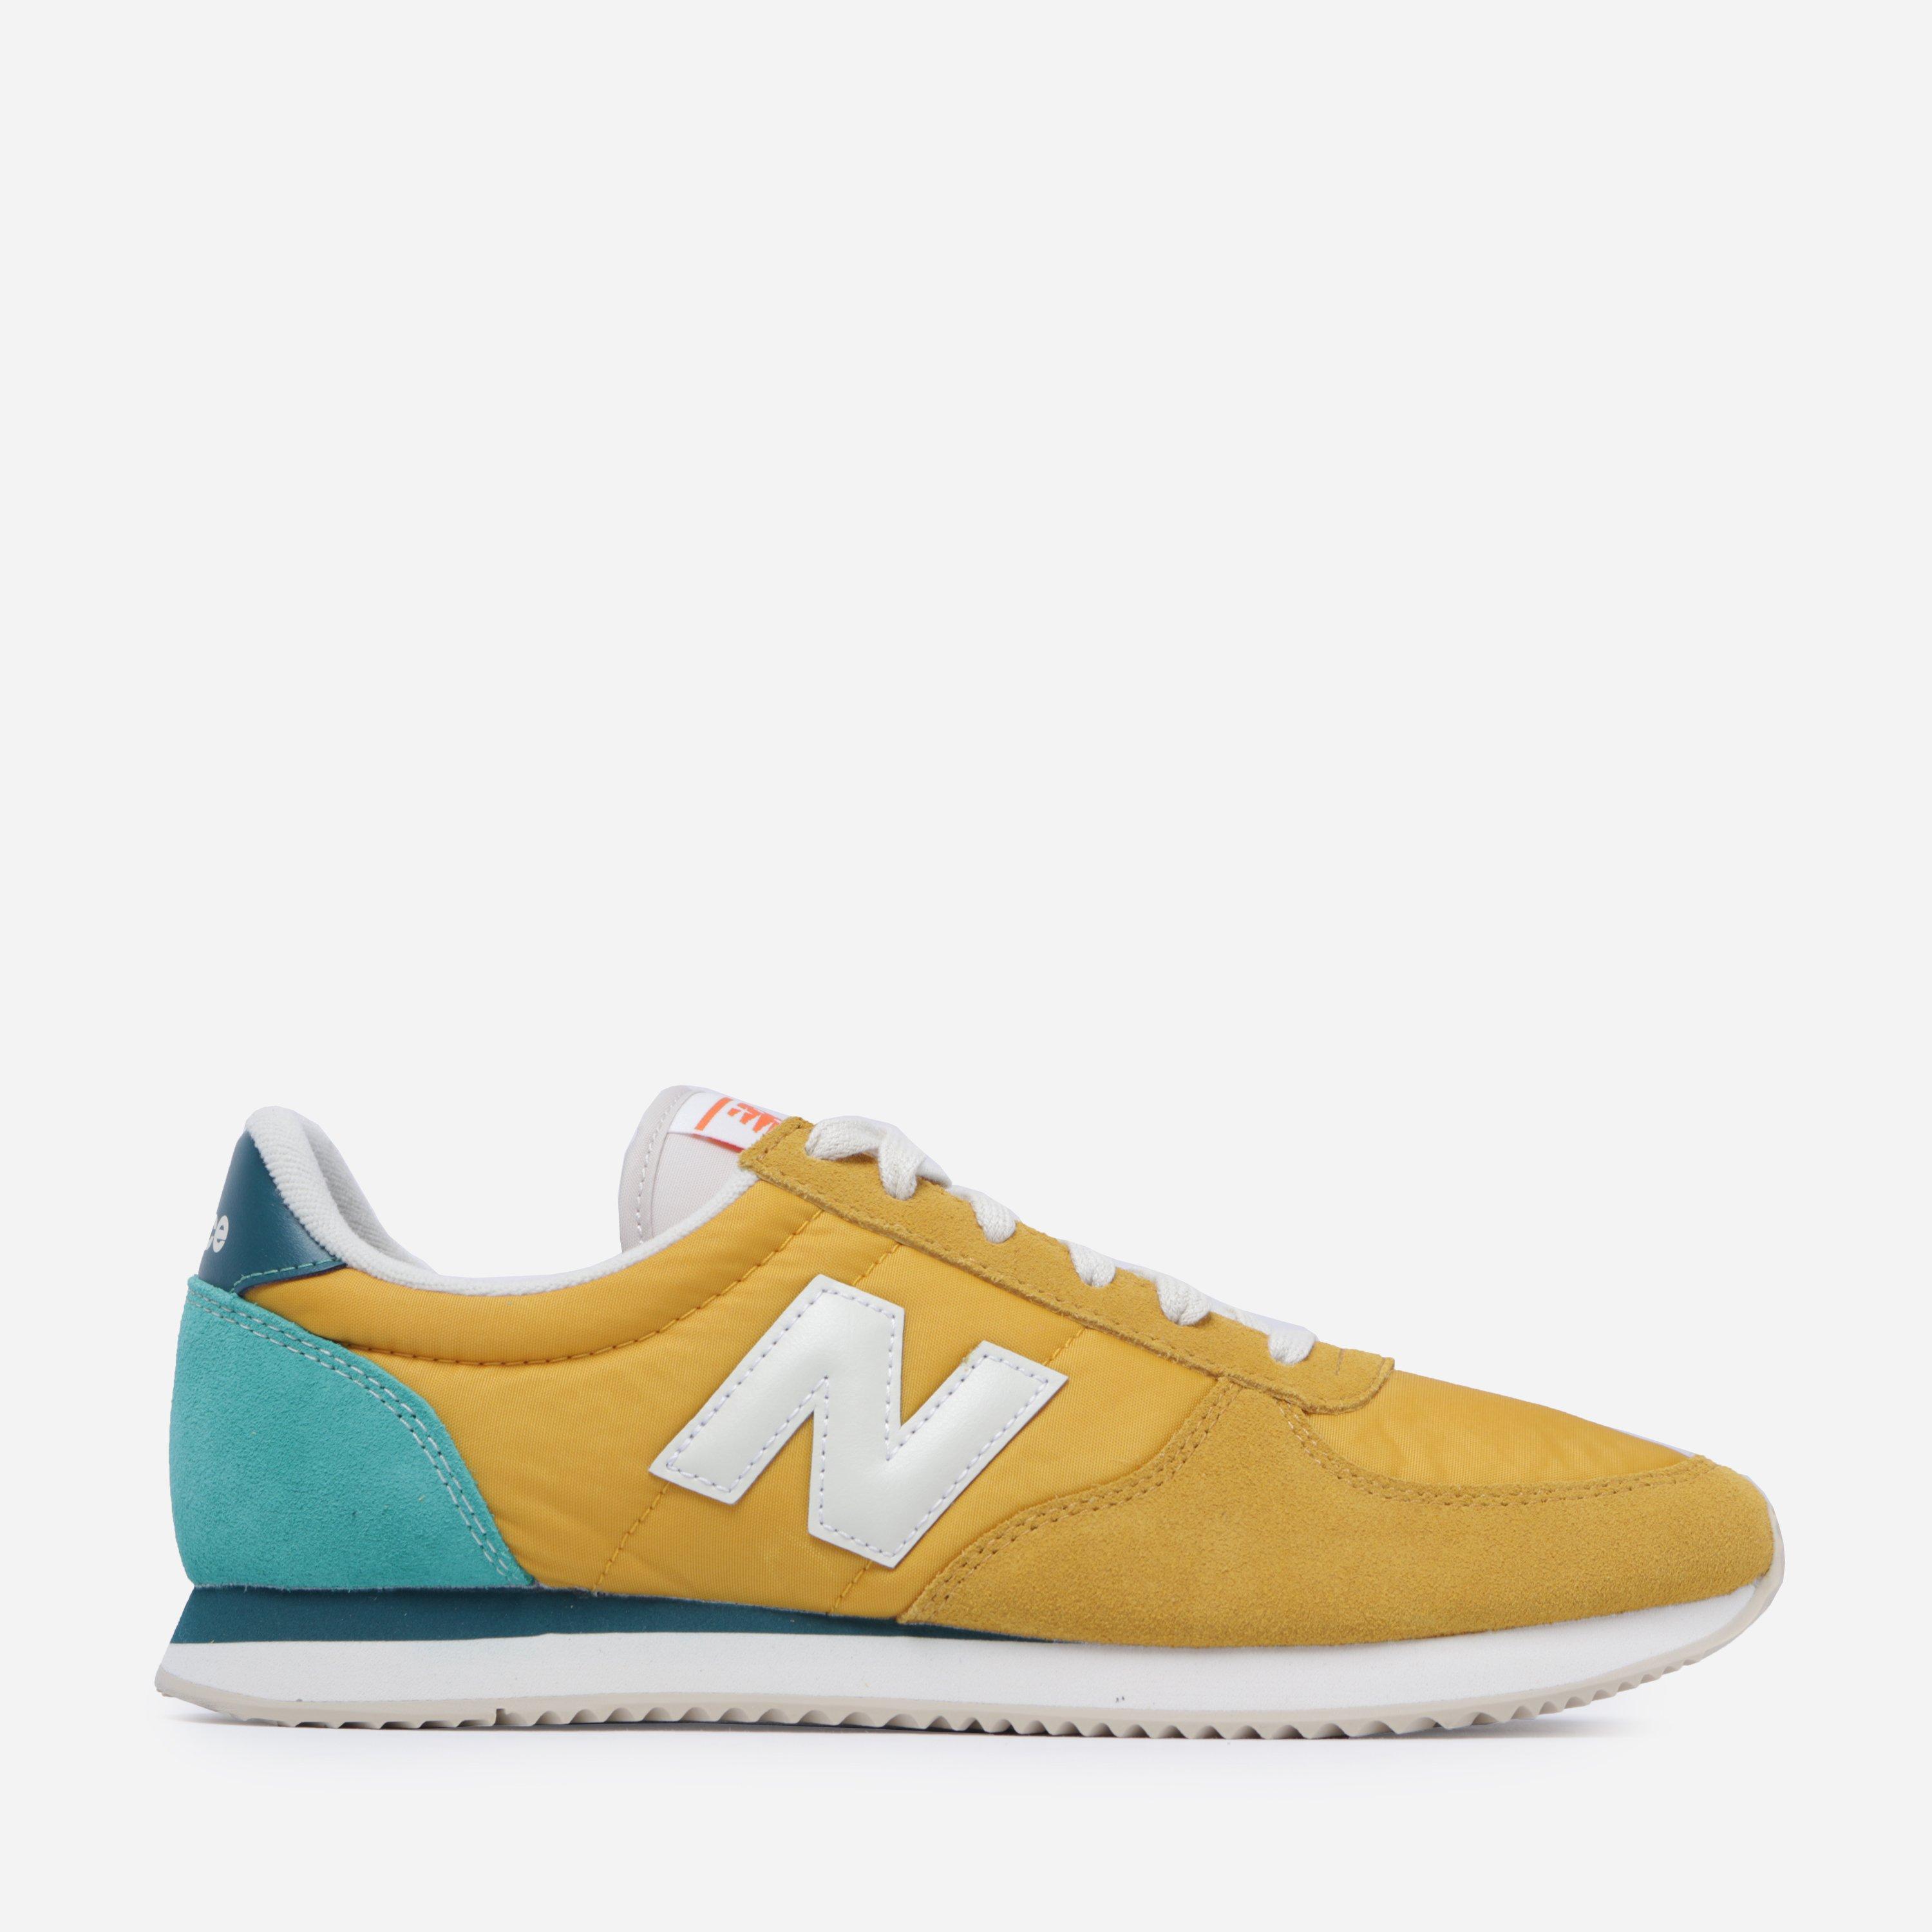 New Balance 220 in Yellow for Men - Lyst